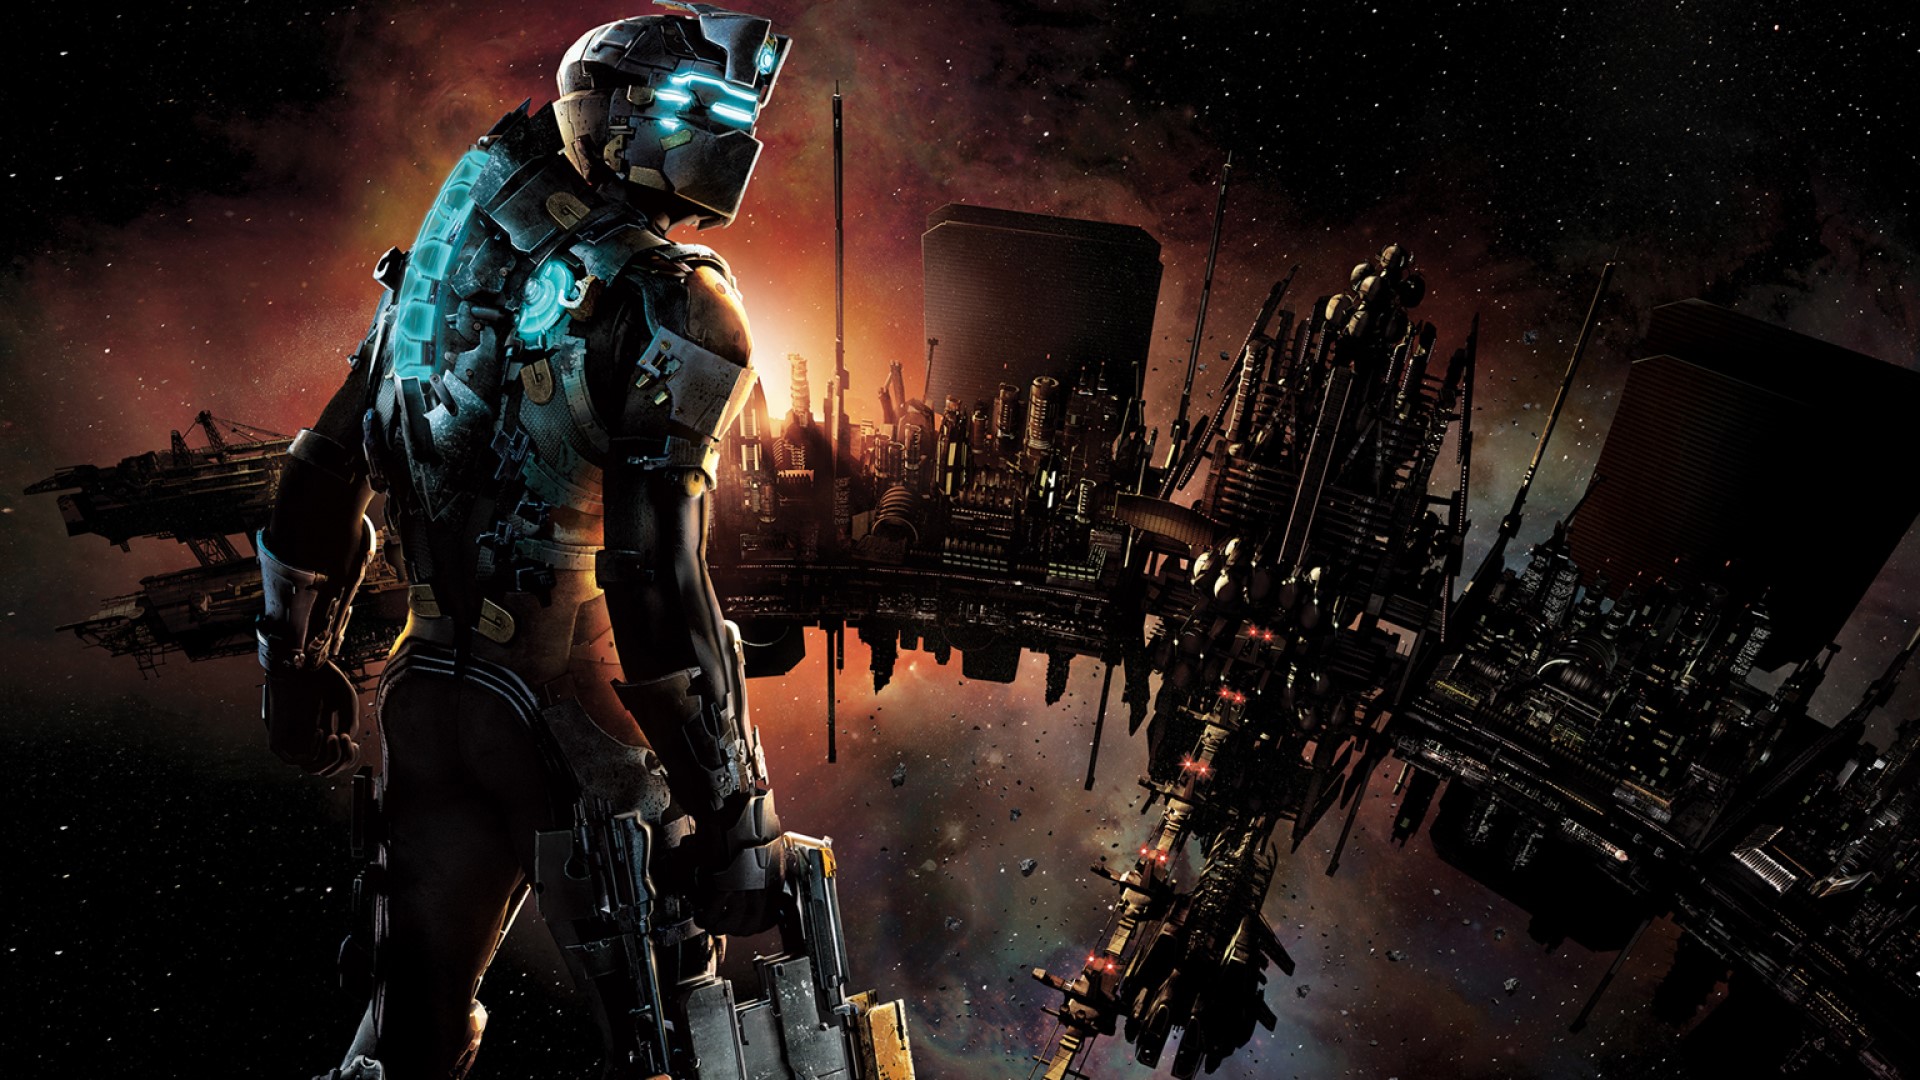 Dead Space 2 and 3 Remakes Are Being Considered by EA, Survey Suggests